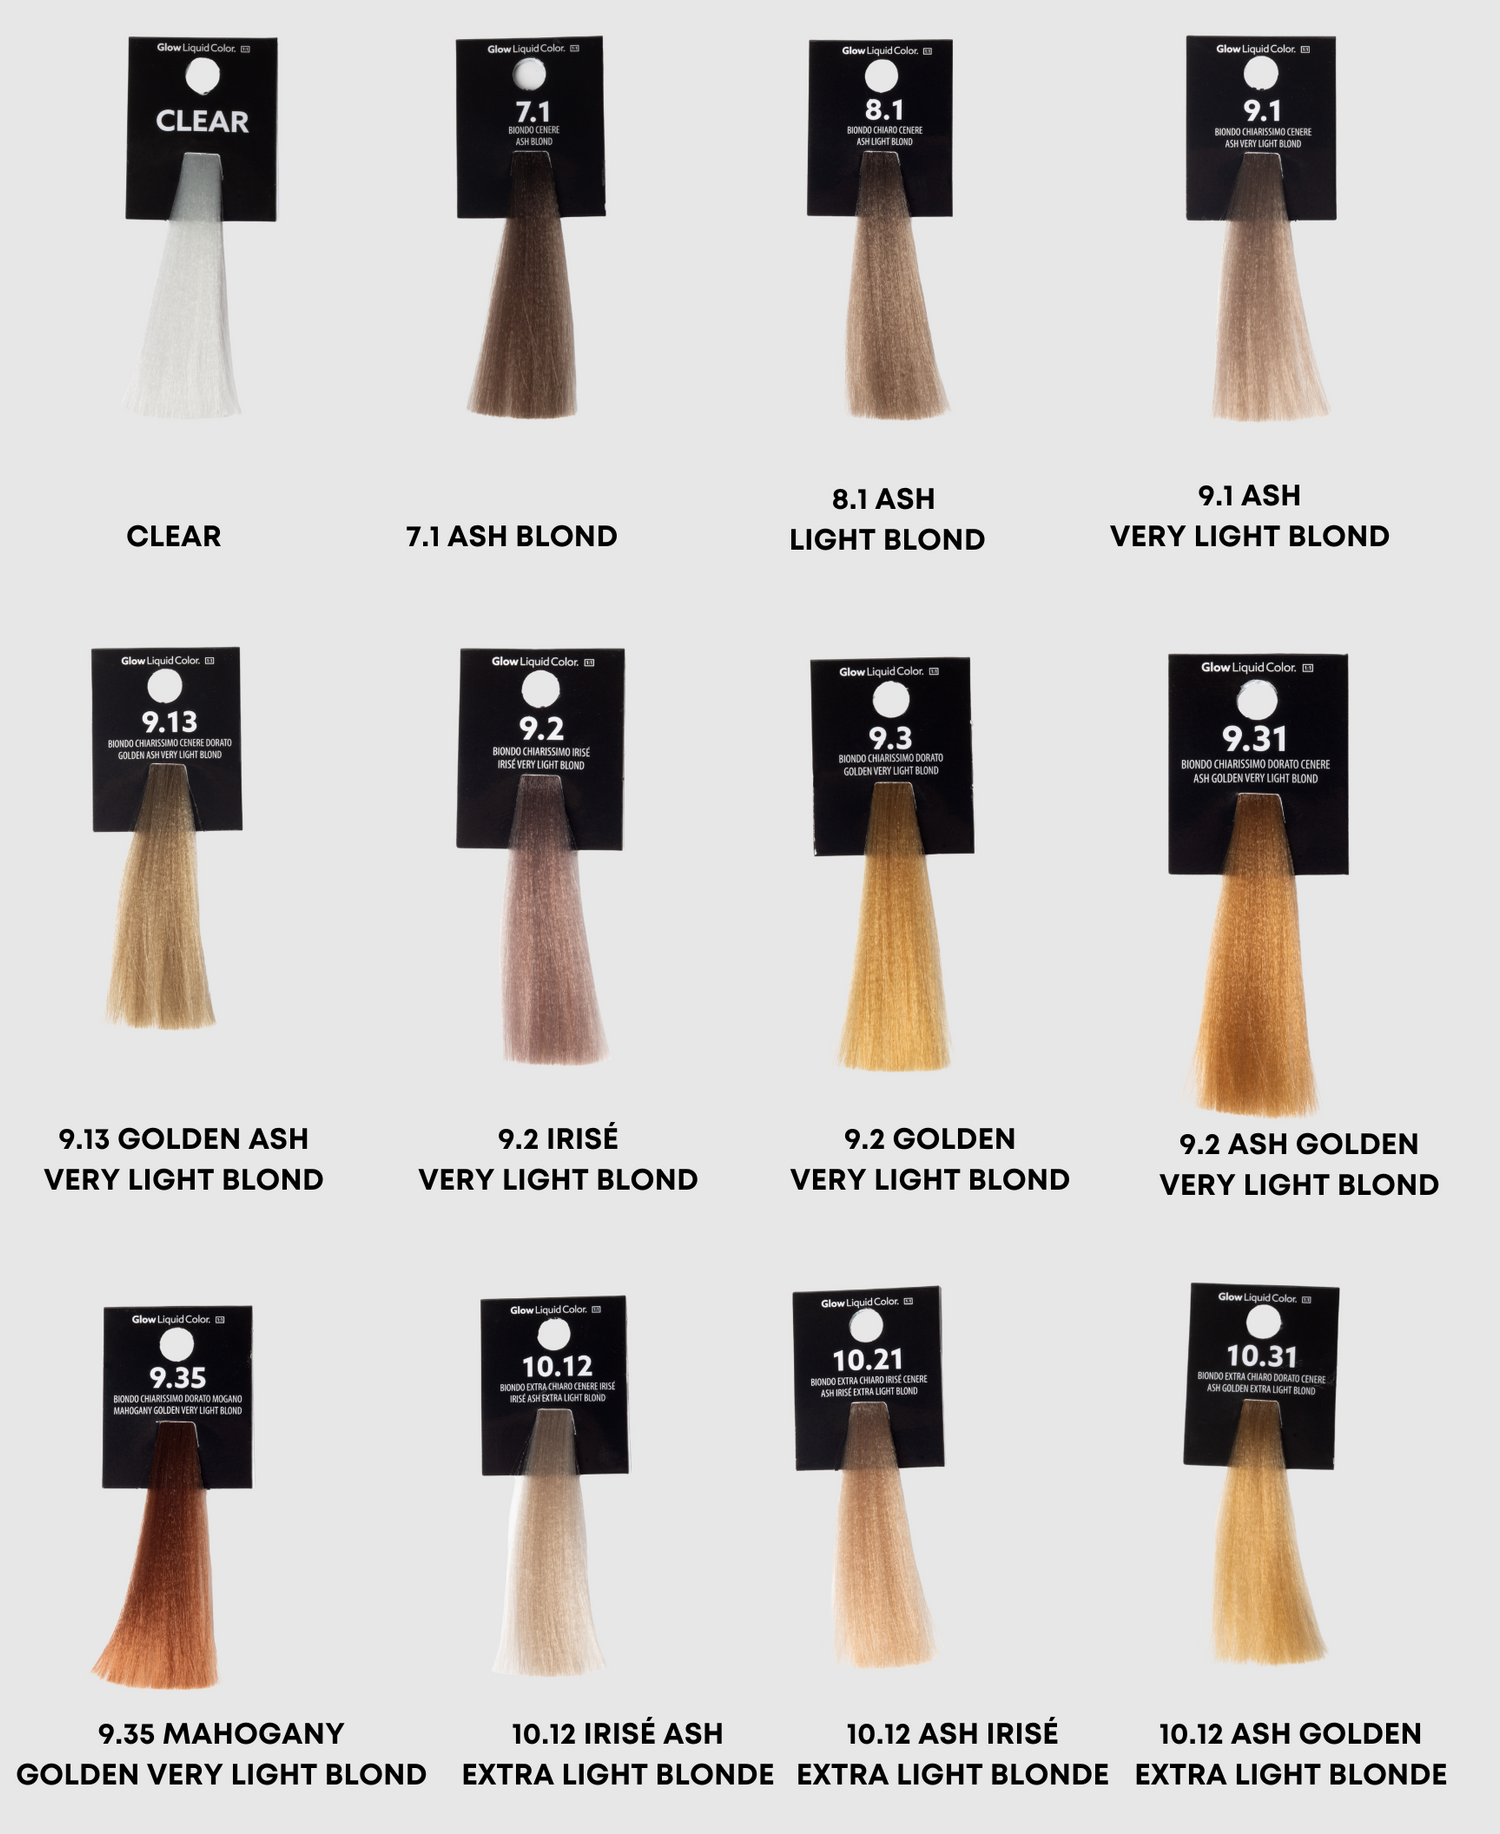 12 specific shades for natural or cosmetically colored blond hair